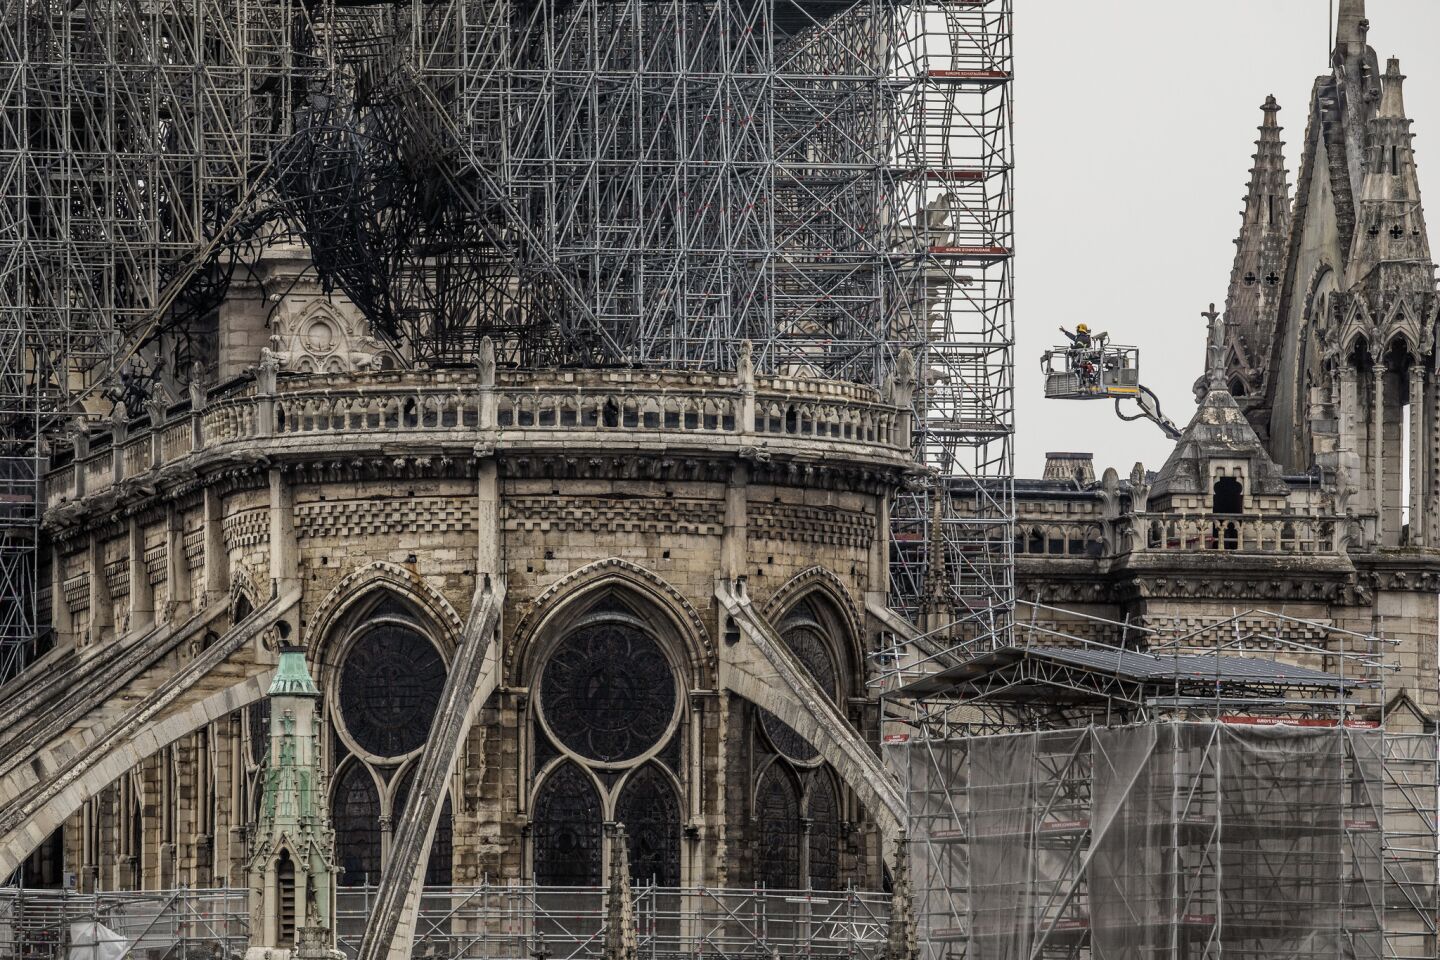 Fire at the Notre Dame cathedral in Paris